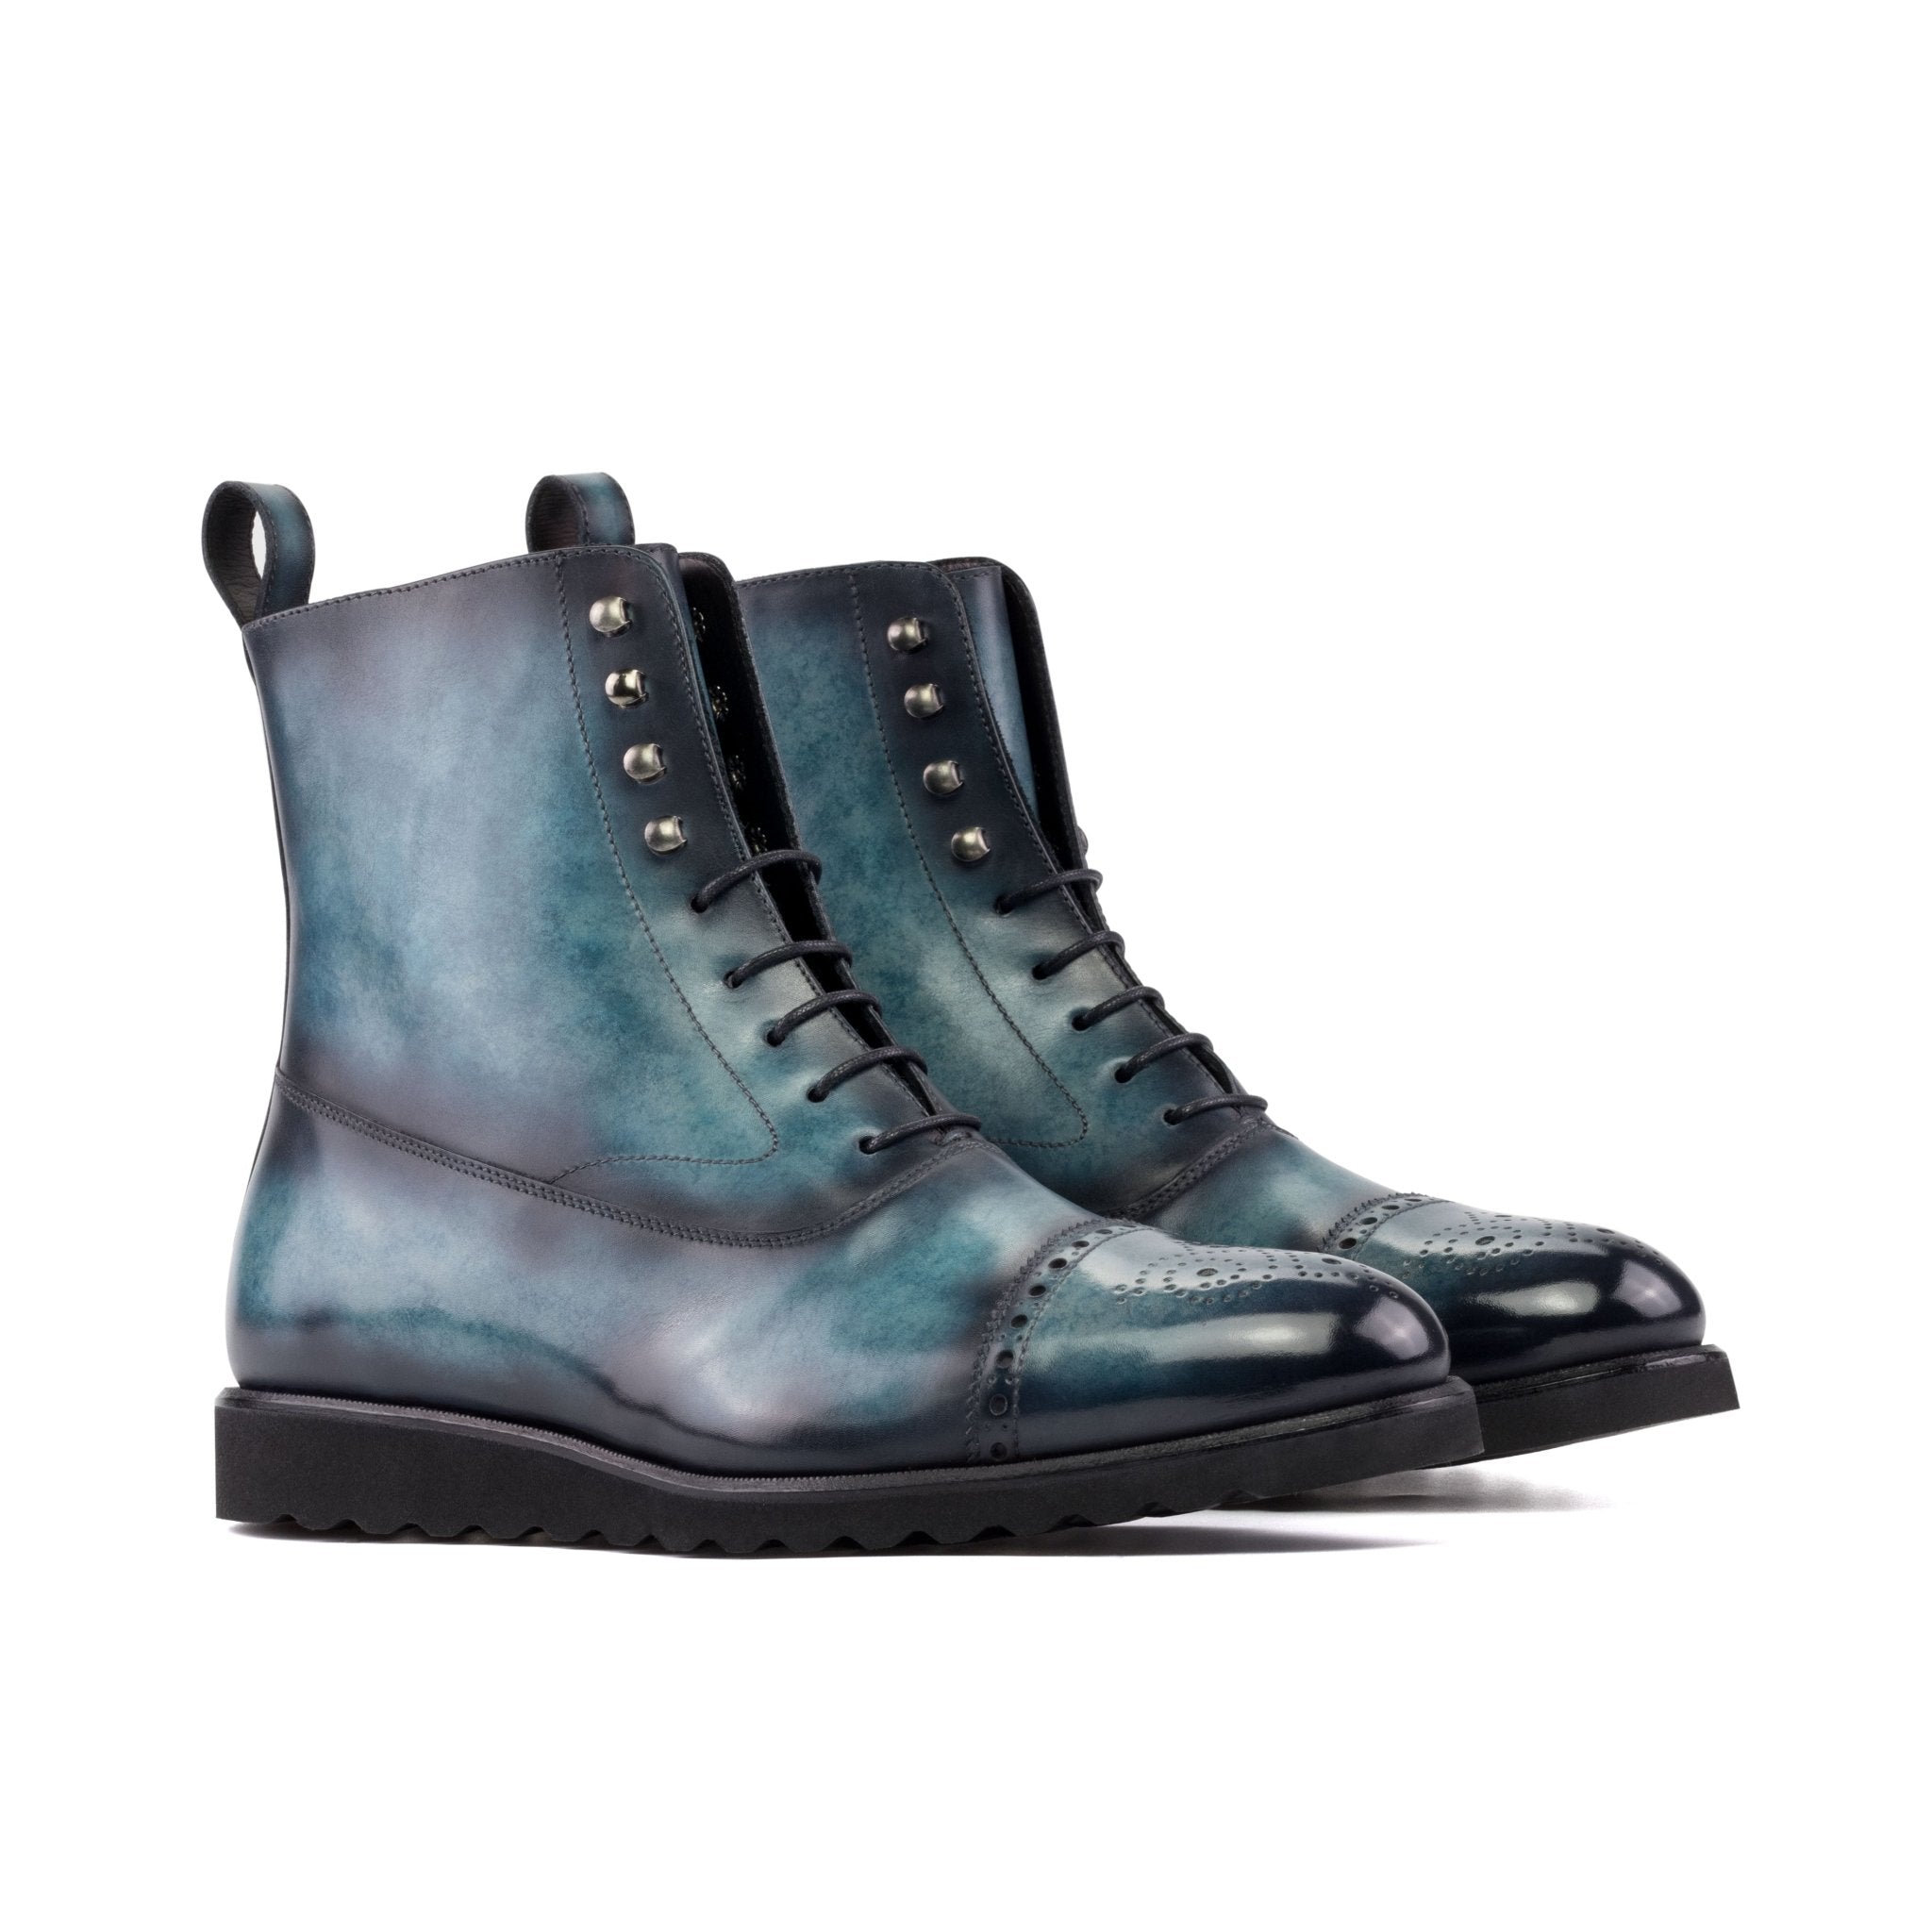 Men's Balmoral Boots in Turquoise Patina with Sneaker Sole - Maison Kingsley Couture Spain